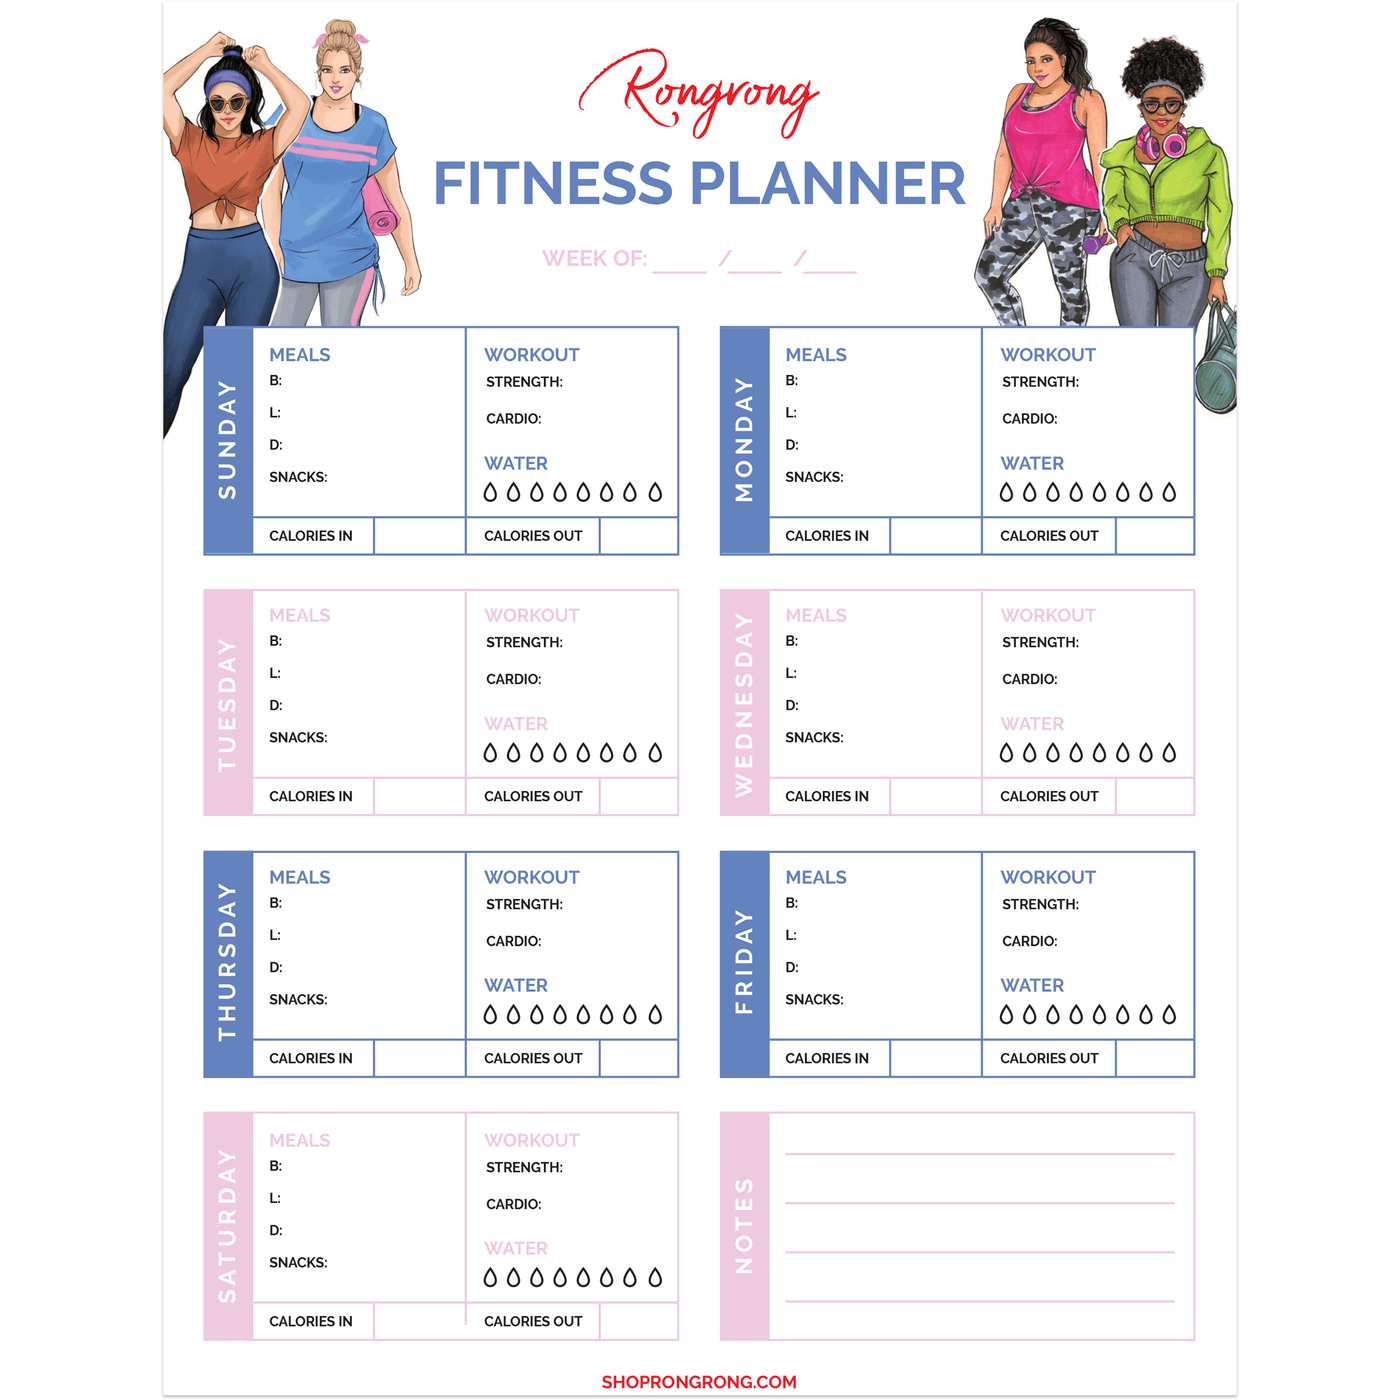 Fitness Planner - Shop Rongrong